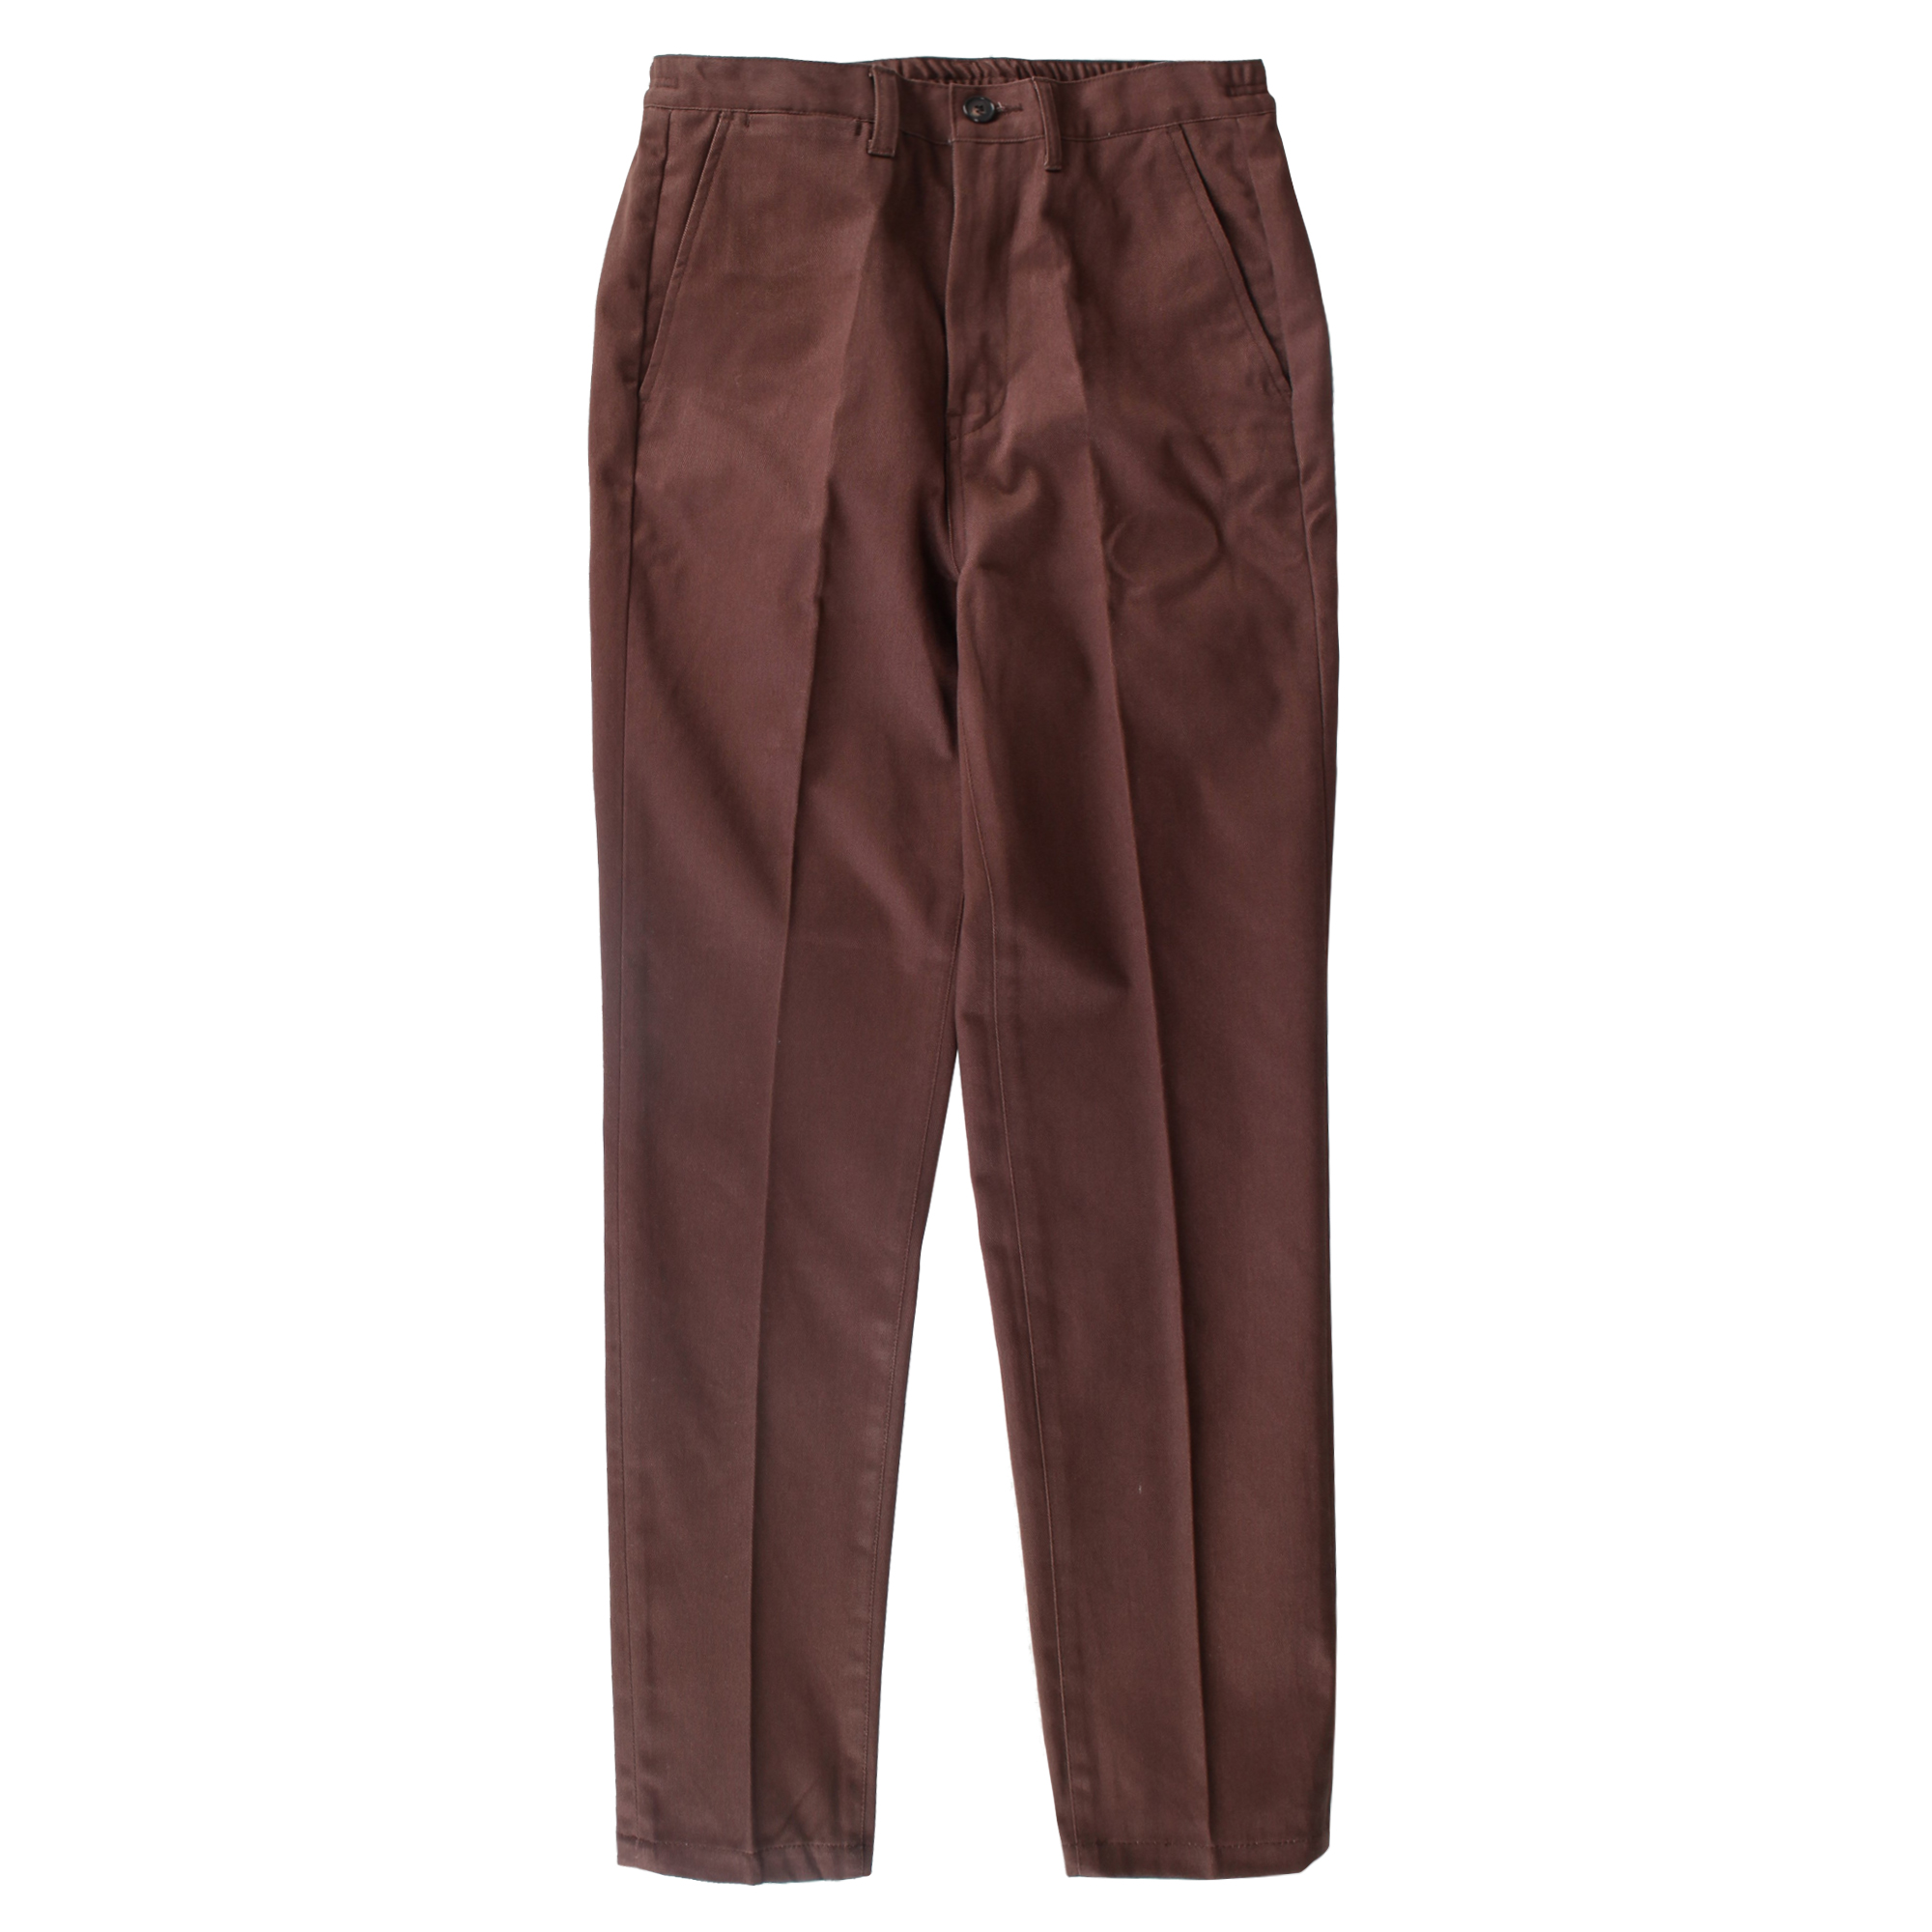 Fineday Clothing Half band trouser_Brown